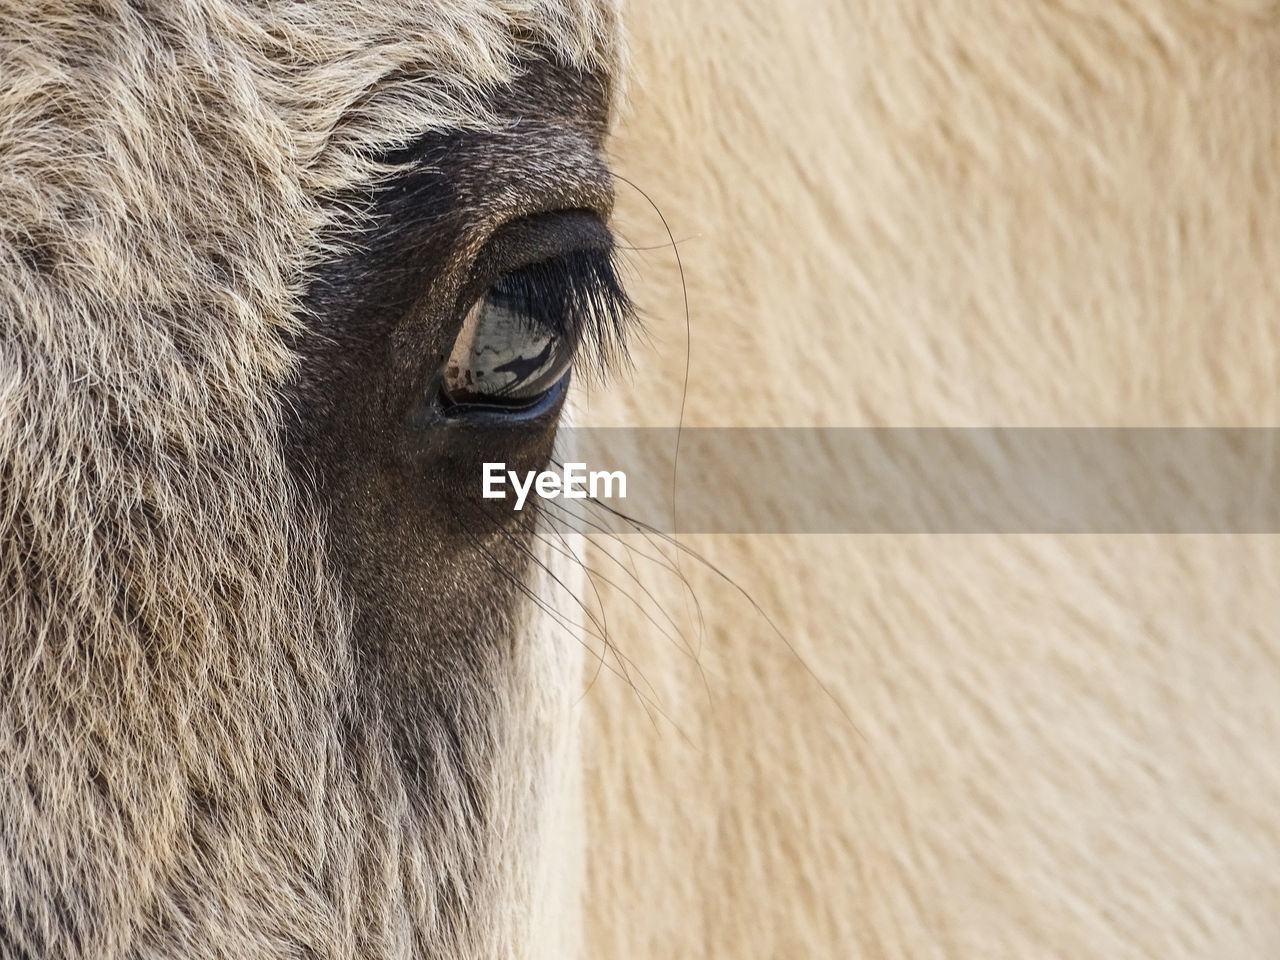 Close up eye of a horse